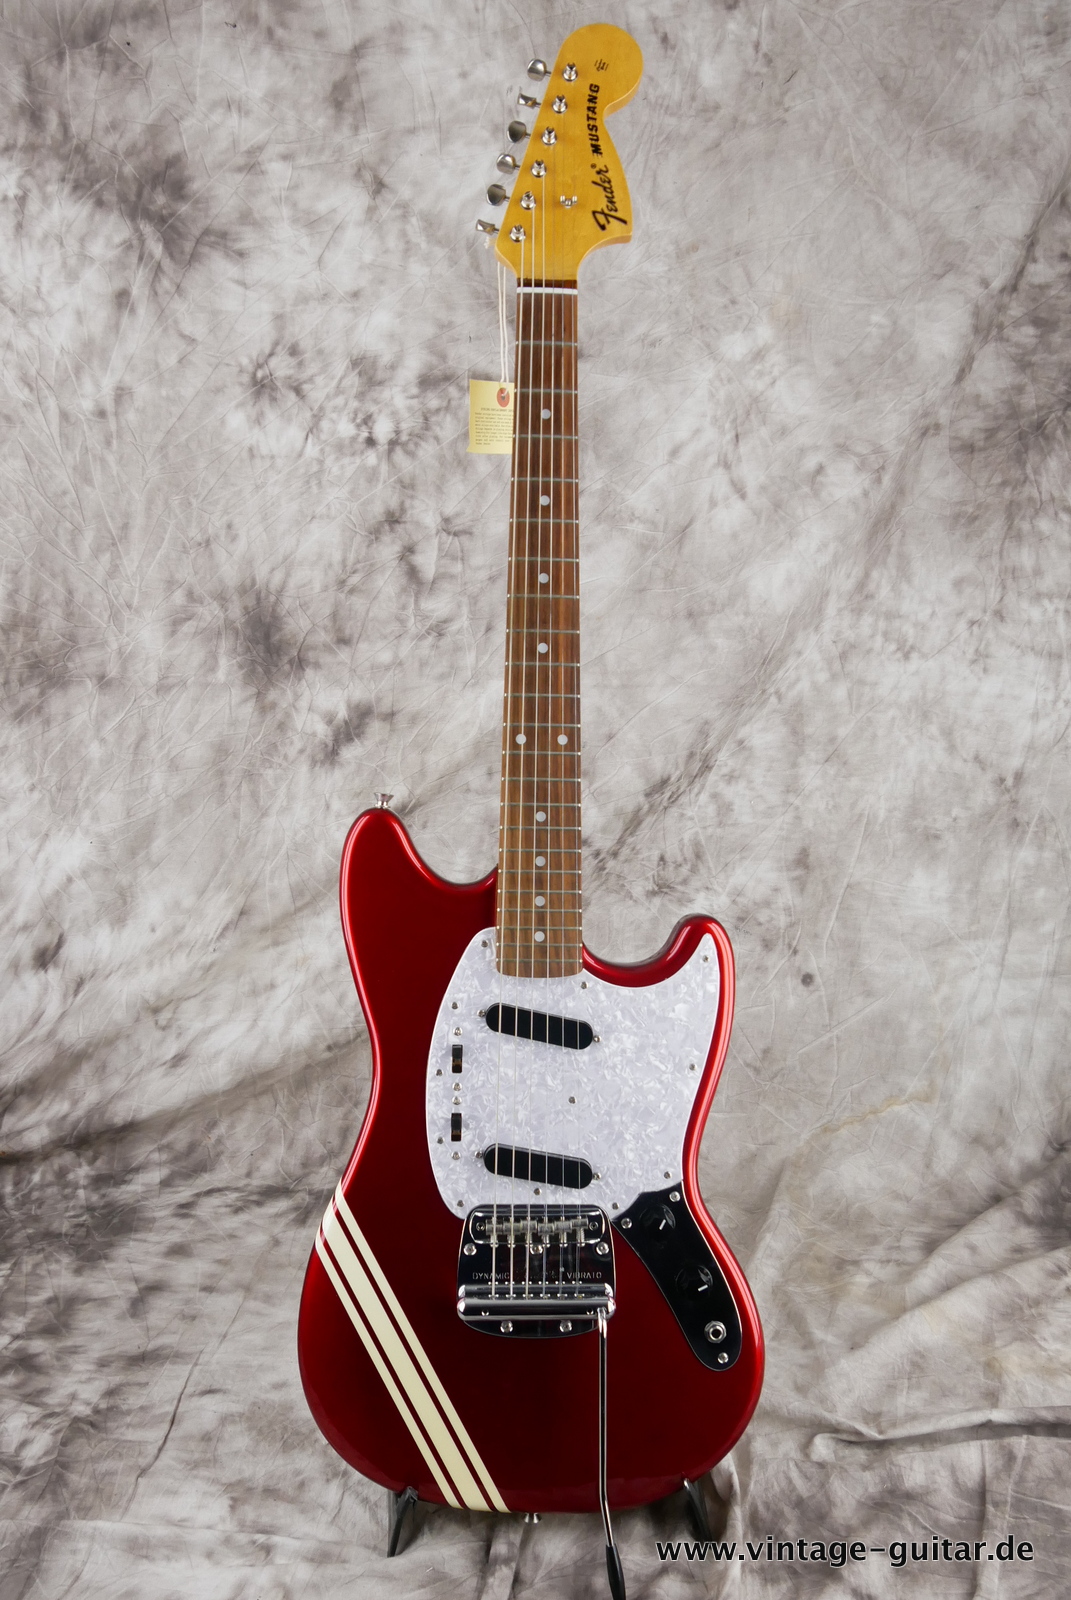 Fender_Mustang_competition_70s_RI_candy_apple_red_Japan_2002-001.JPG